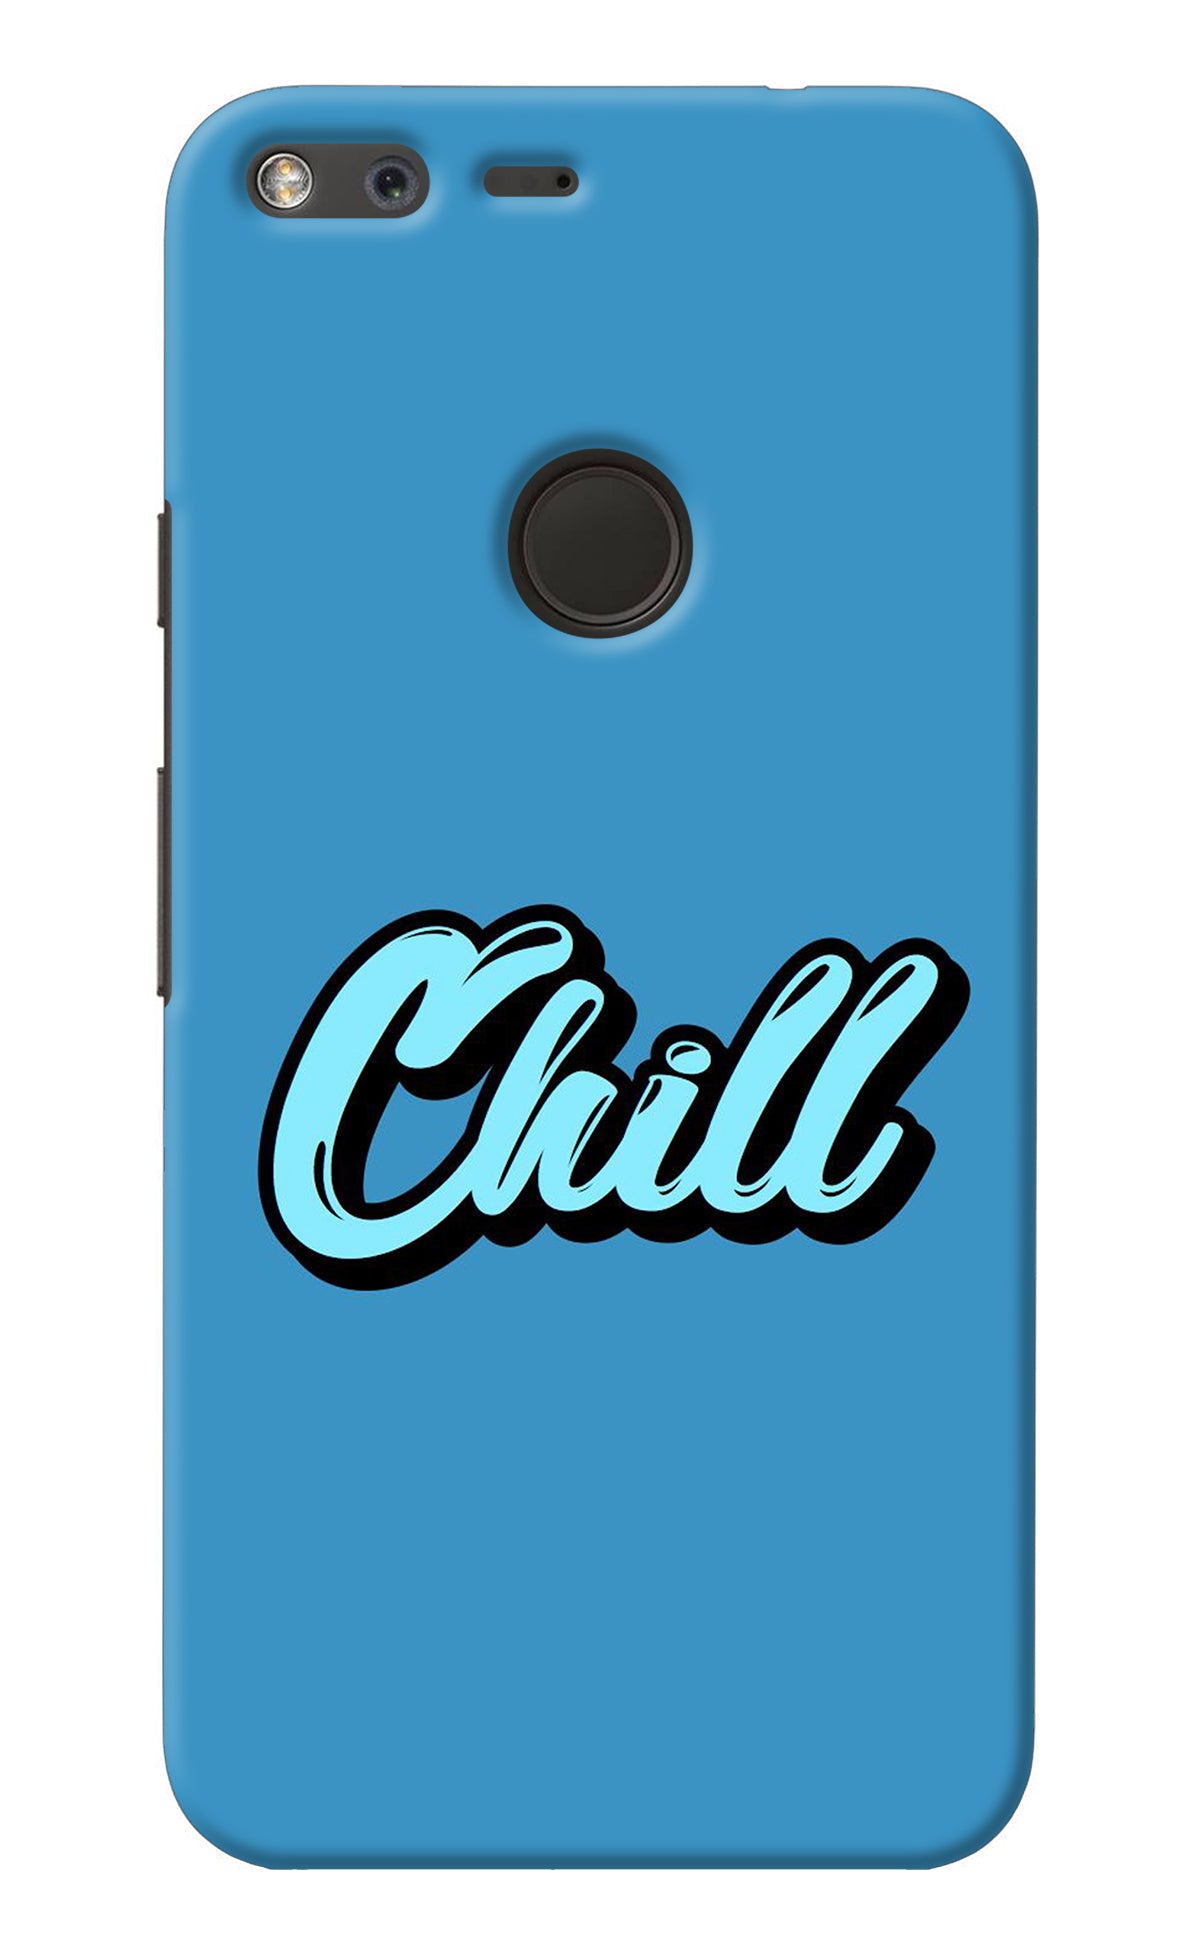 Chill Google Pixel XL Back Cover